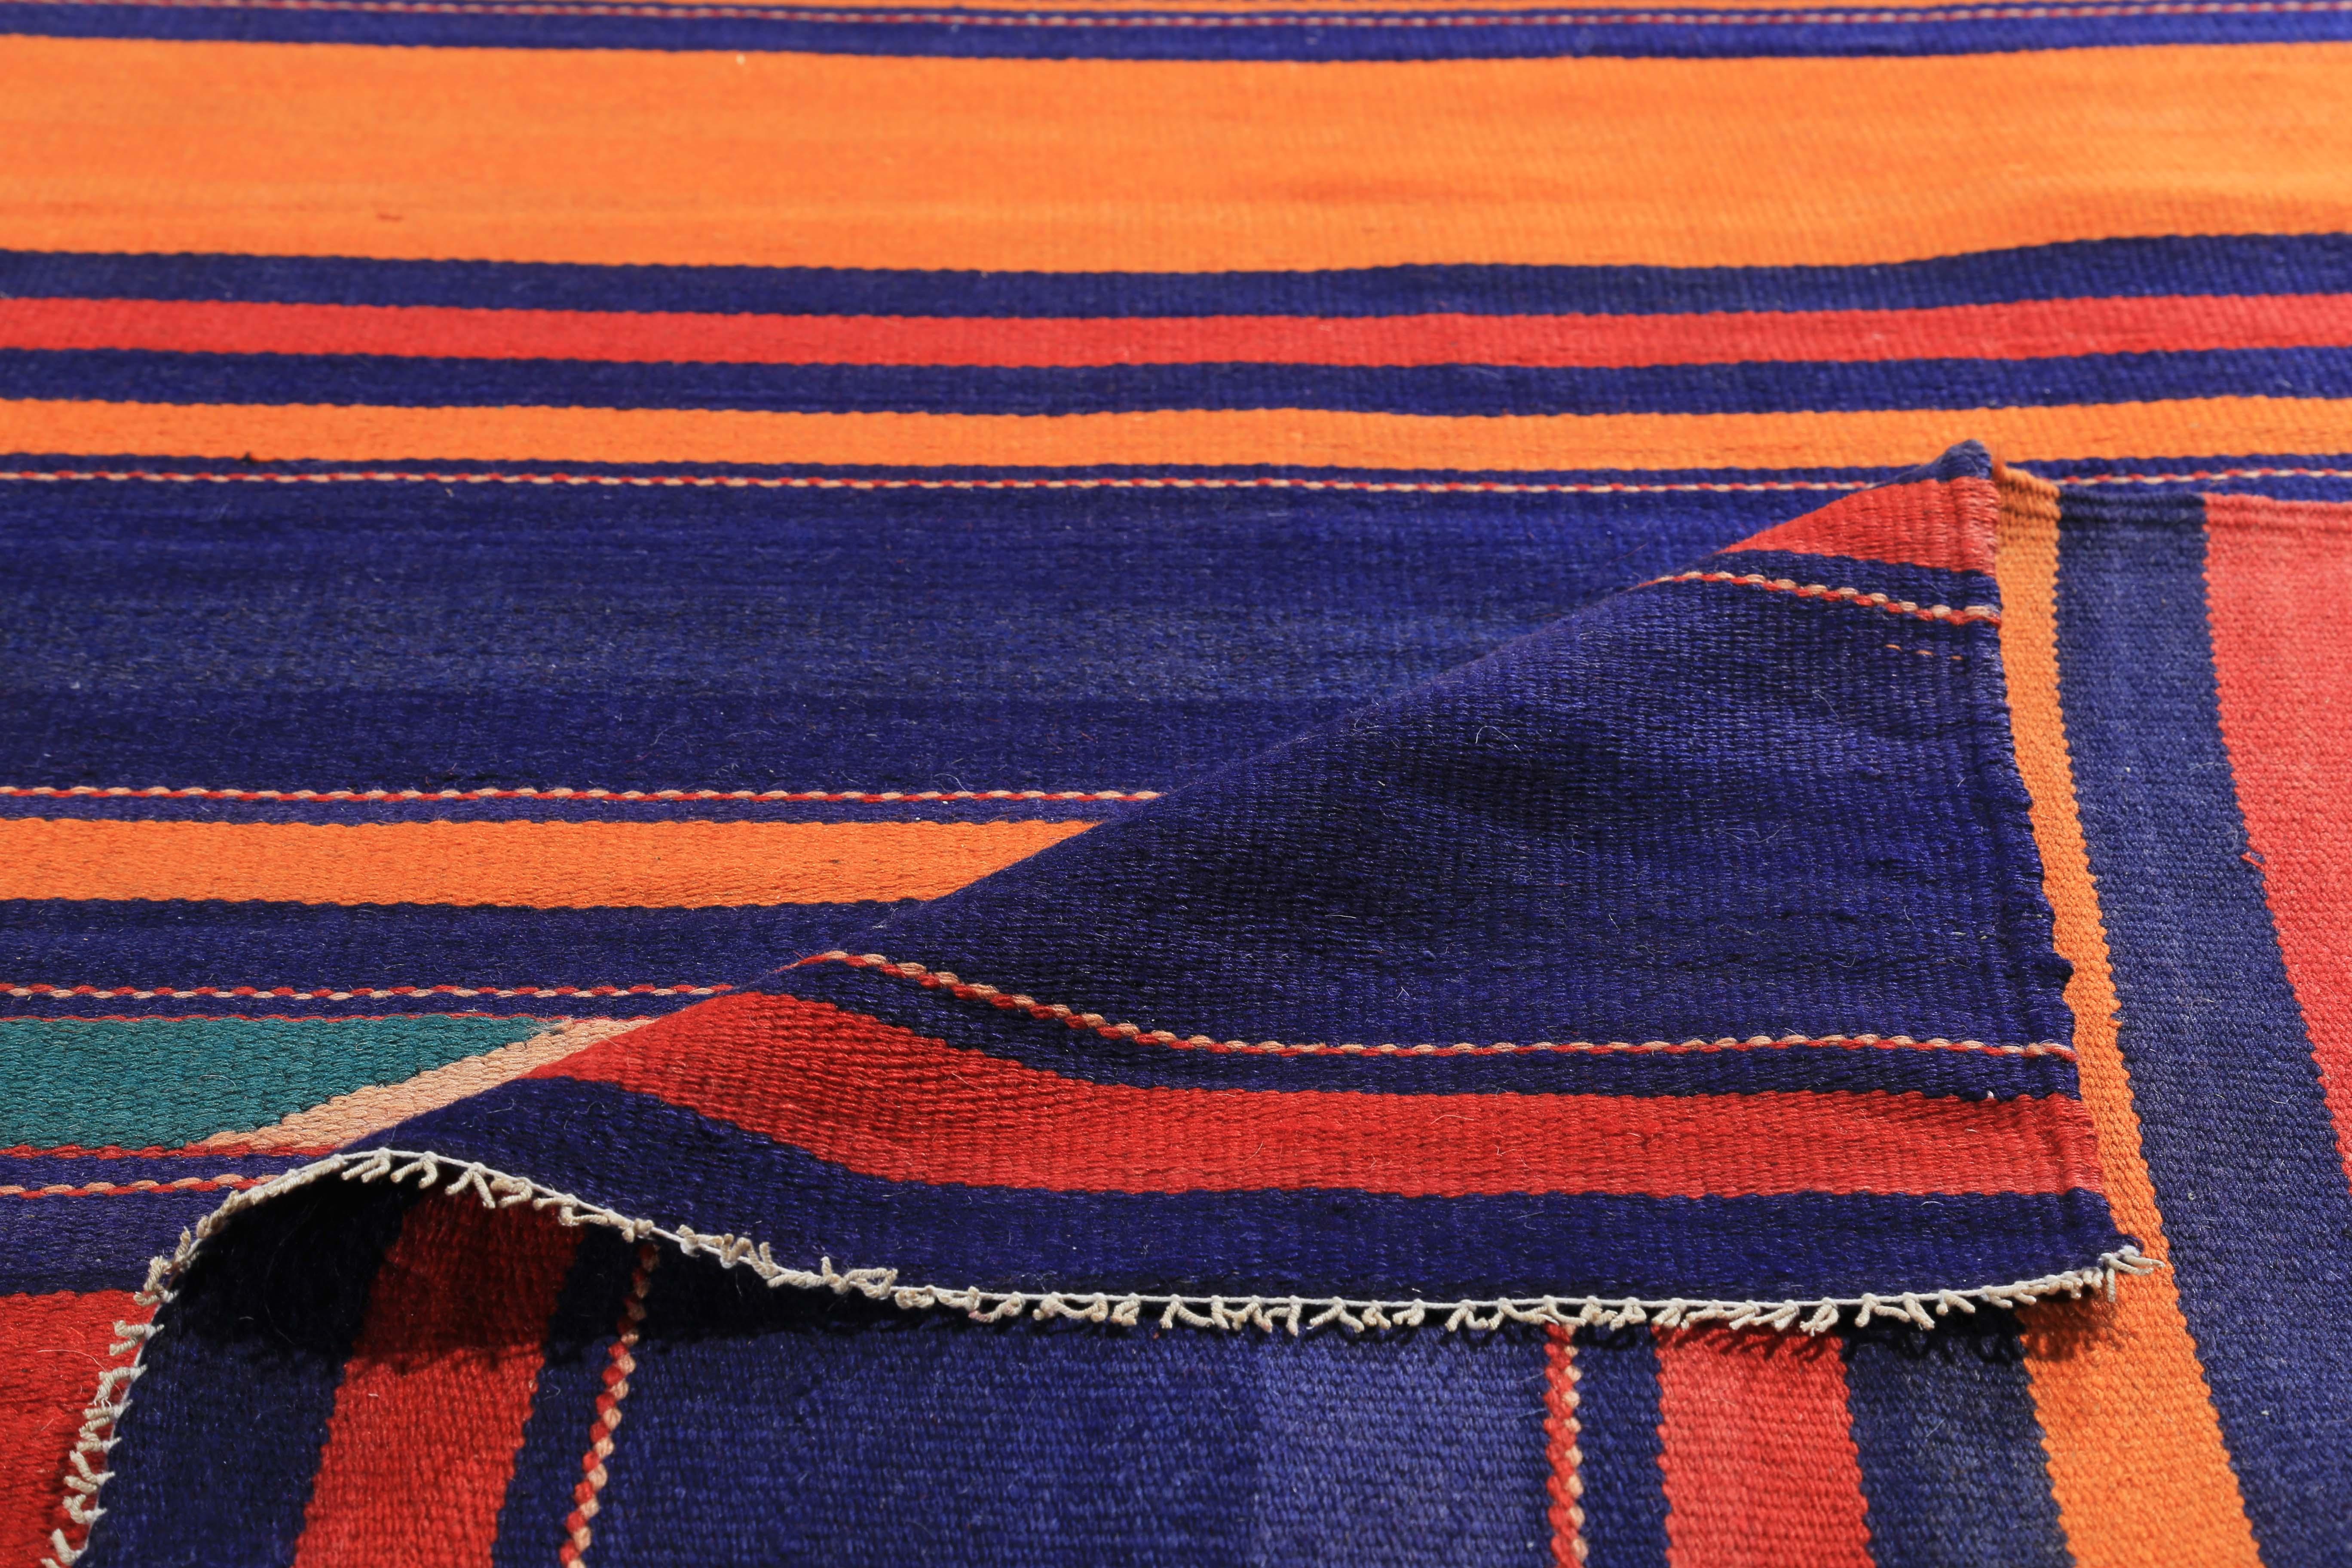 Turkish Kilim Runner Rug with Blue and Orange Stripes In New Condition For Sale In Dallas, TX